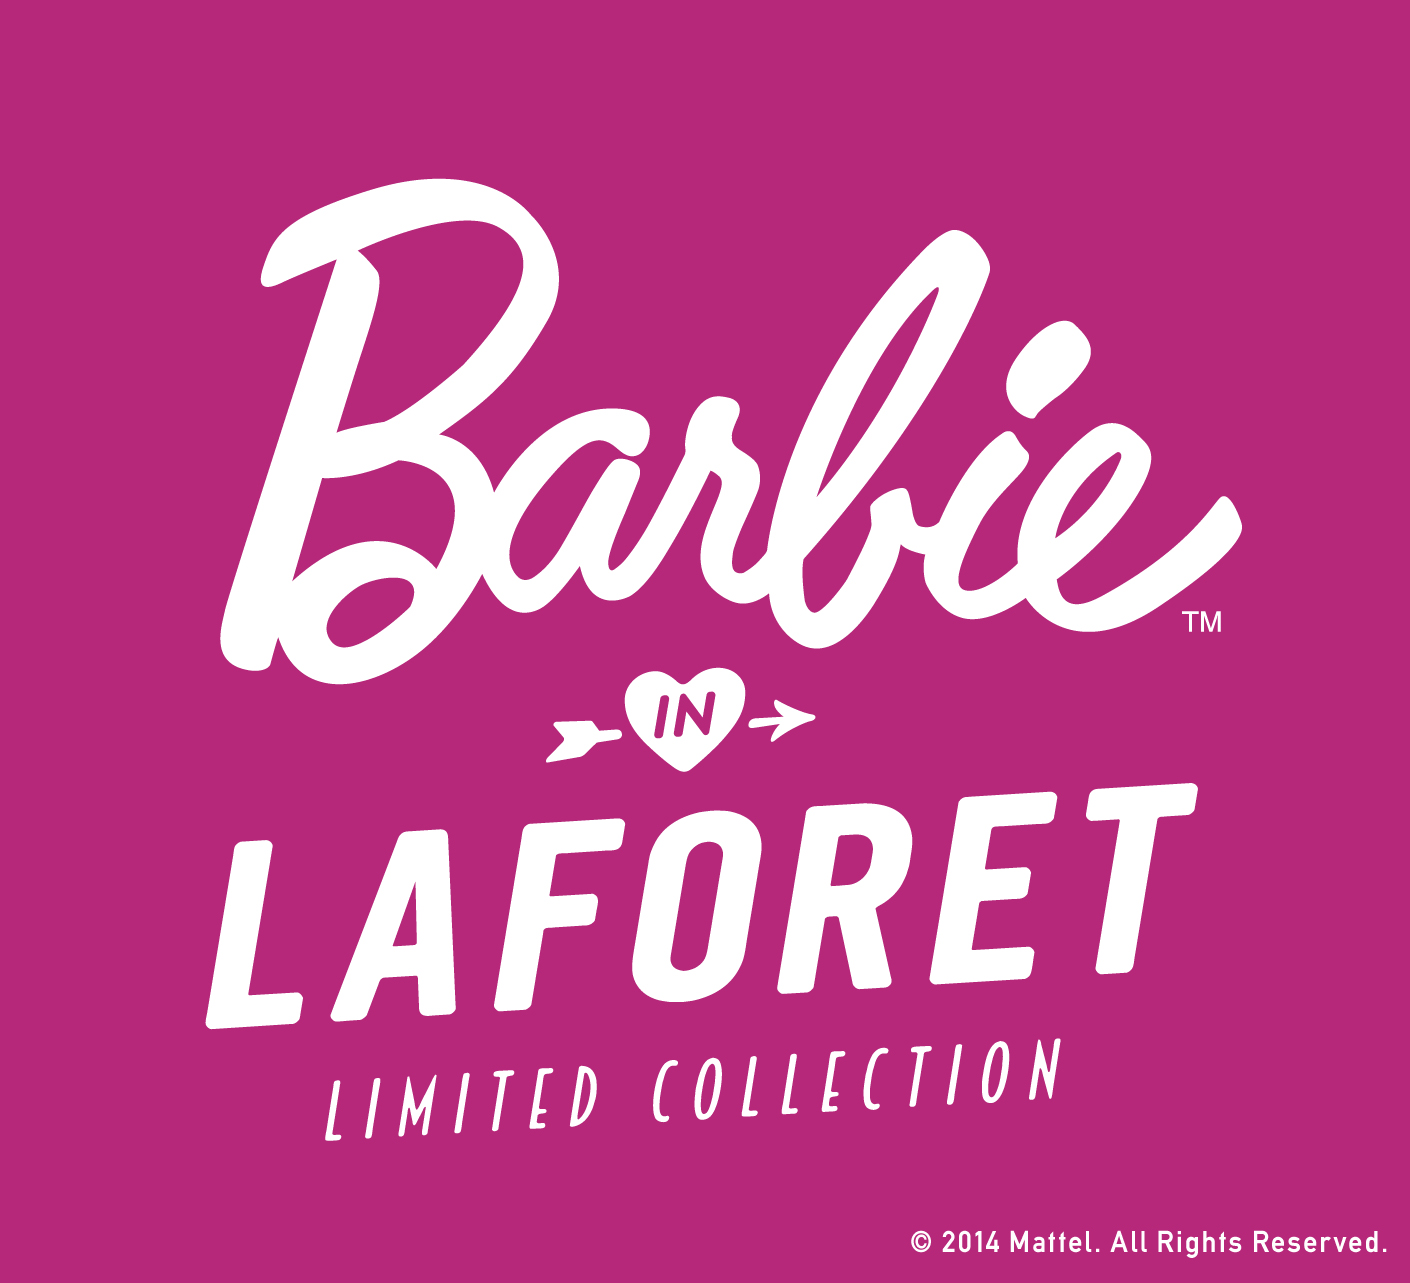 『Barbie』55 周年記念 「Barbie in LAFORET -Limited Collection-」2015年2月7日(土)～3月